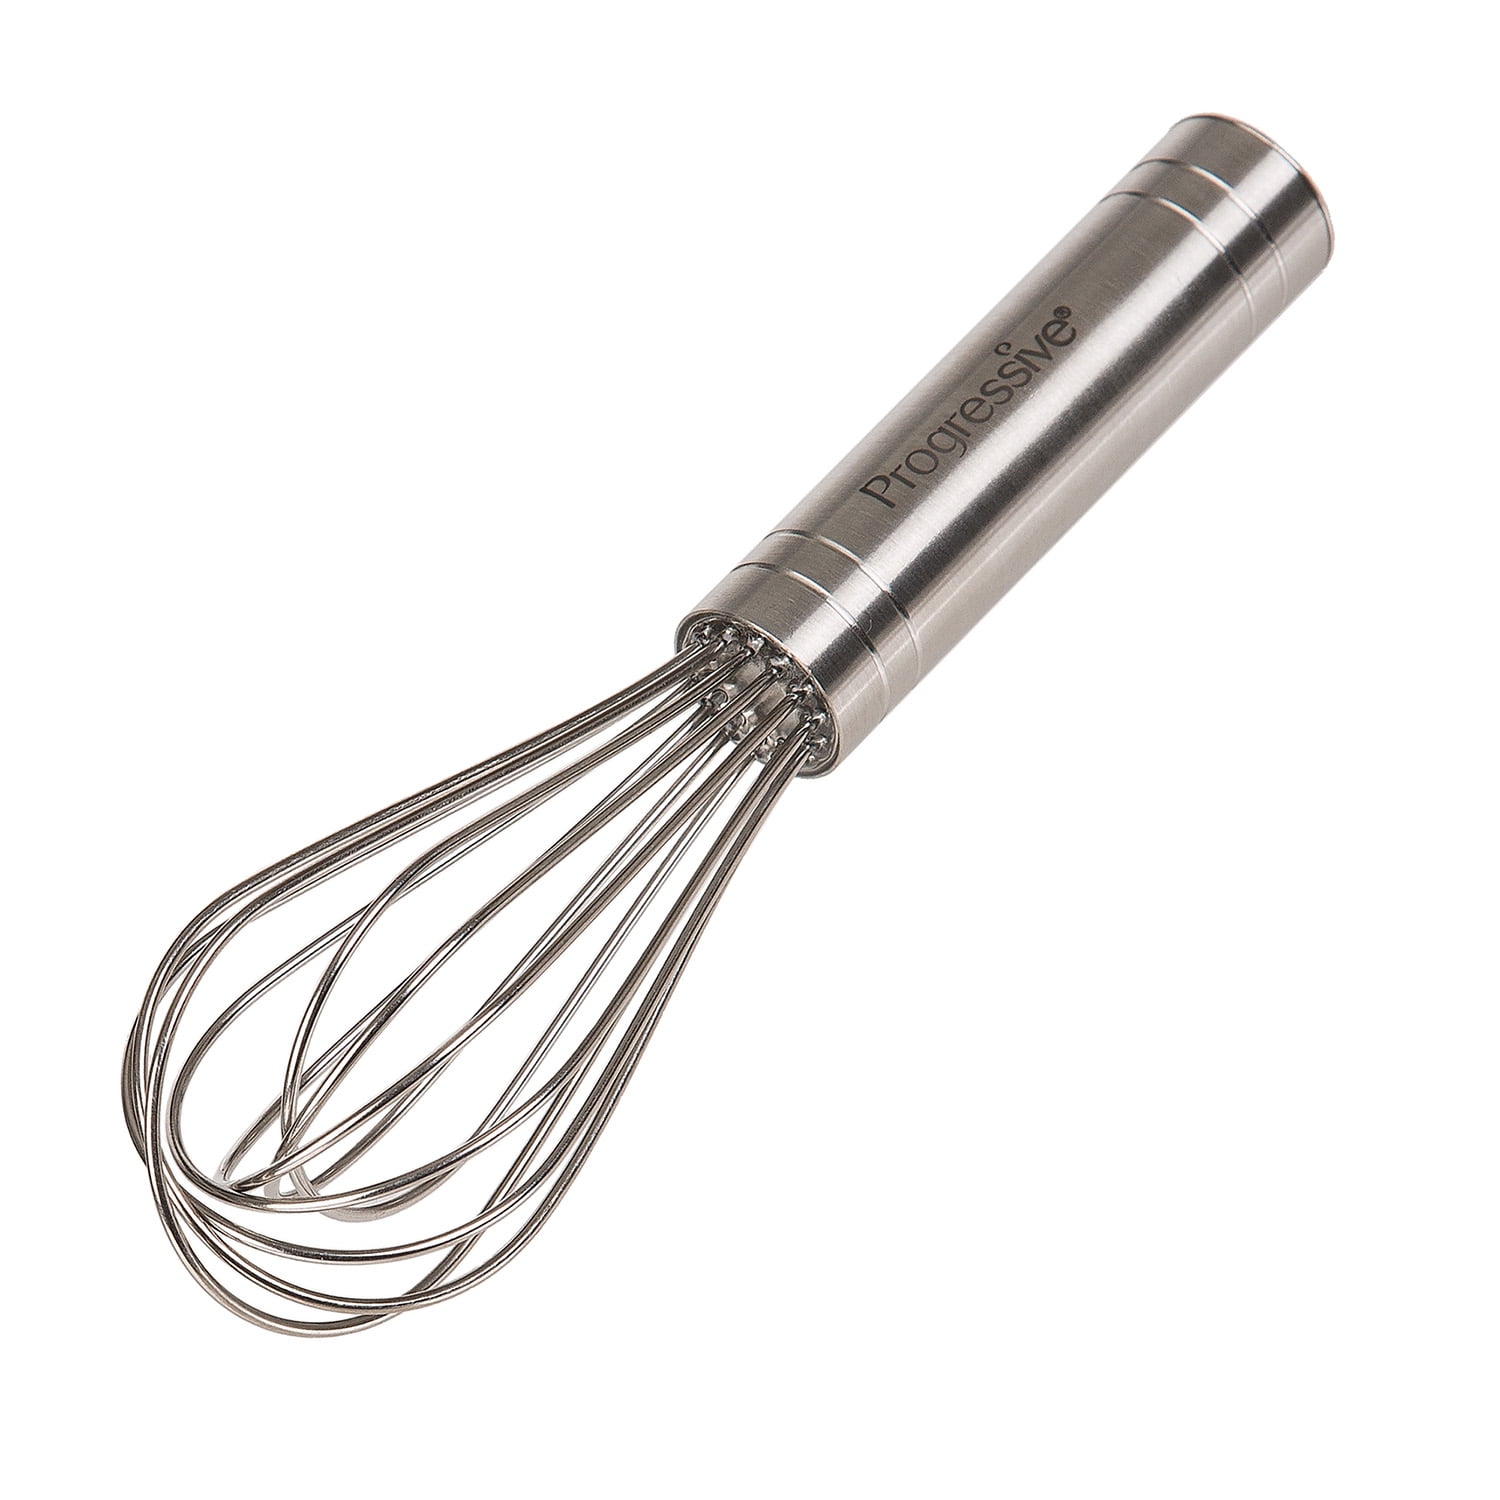 Best Balloon Whisk - Lee Valley Tools